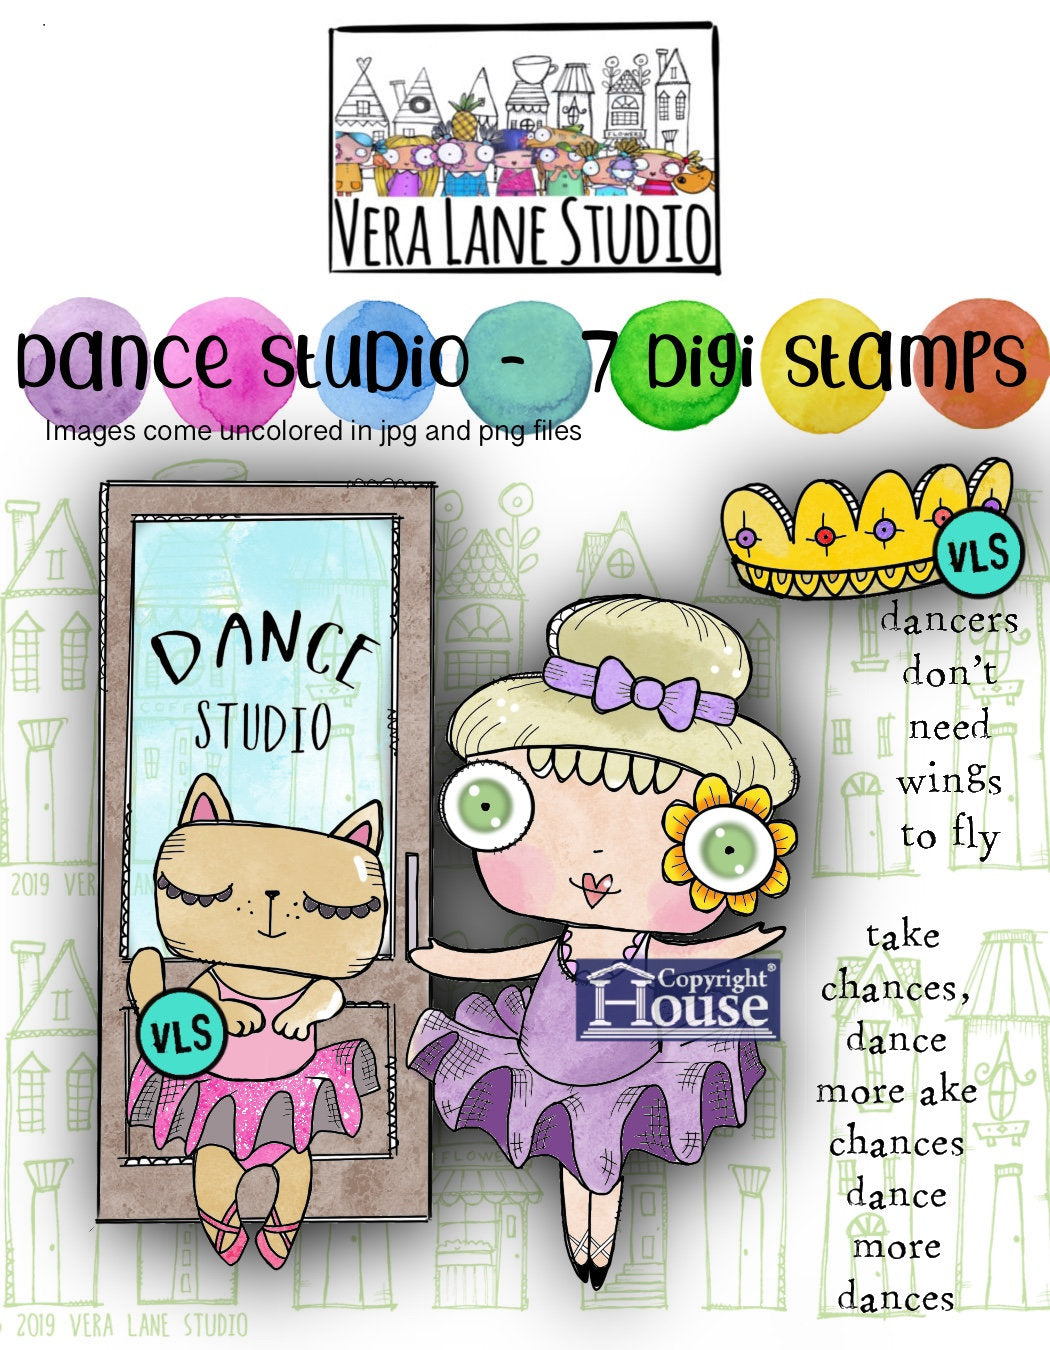 Dance Studio - 7 digi stamp set with whimsical dancer and cat in png and jpg files - ready for instant download